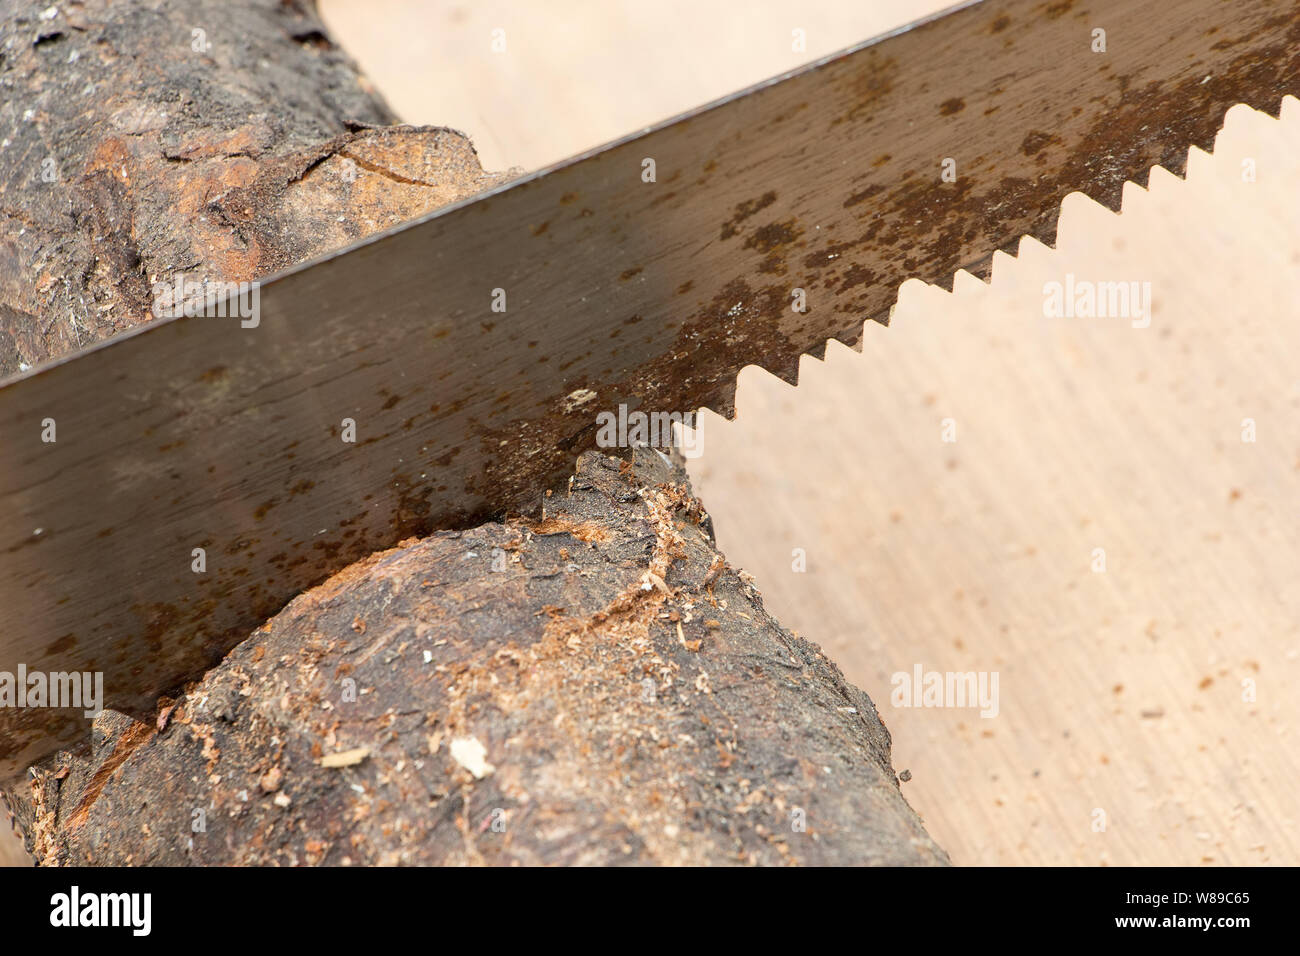 Detail of old saw, sawing wooden log, trunk. Concept of natural traditional work outdoors. Stock Photo